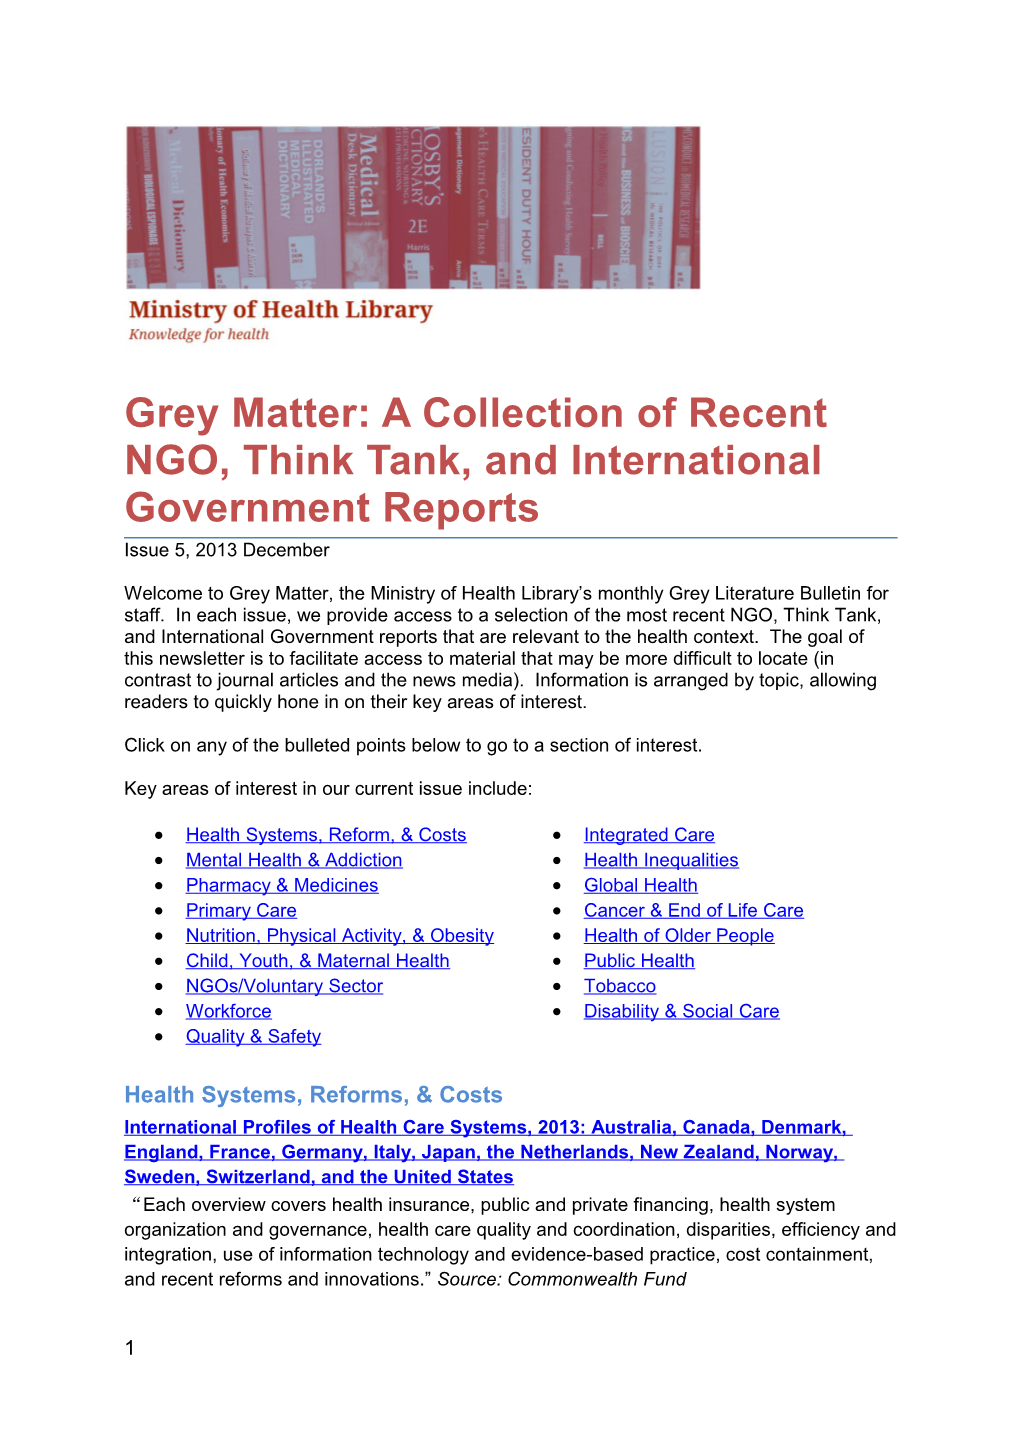 Grey Matter: a Collection of Recent NGO, Think Tank, and International Government Reports